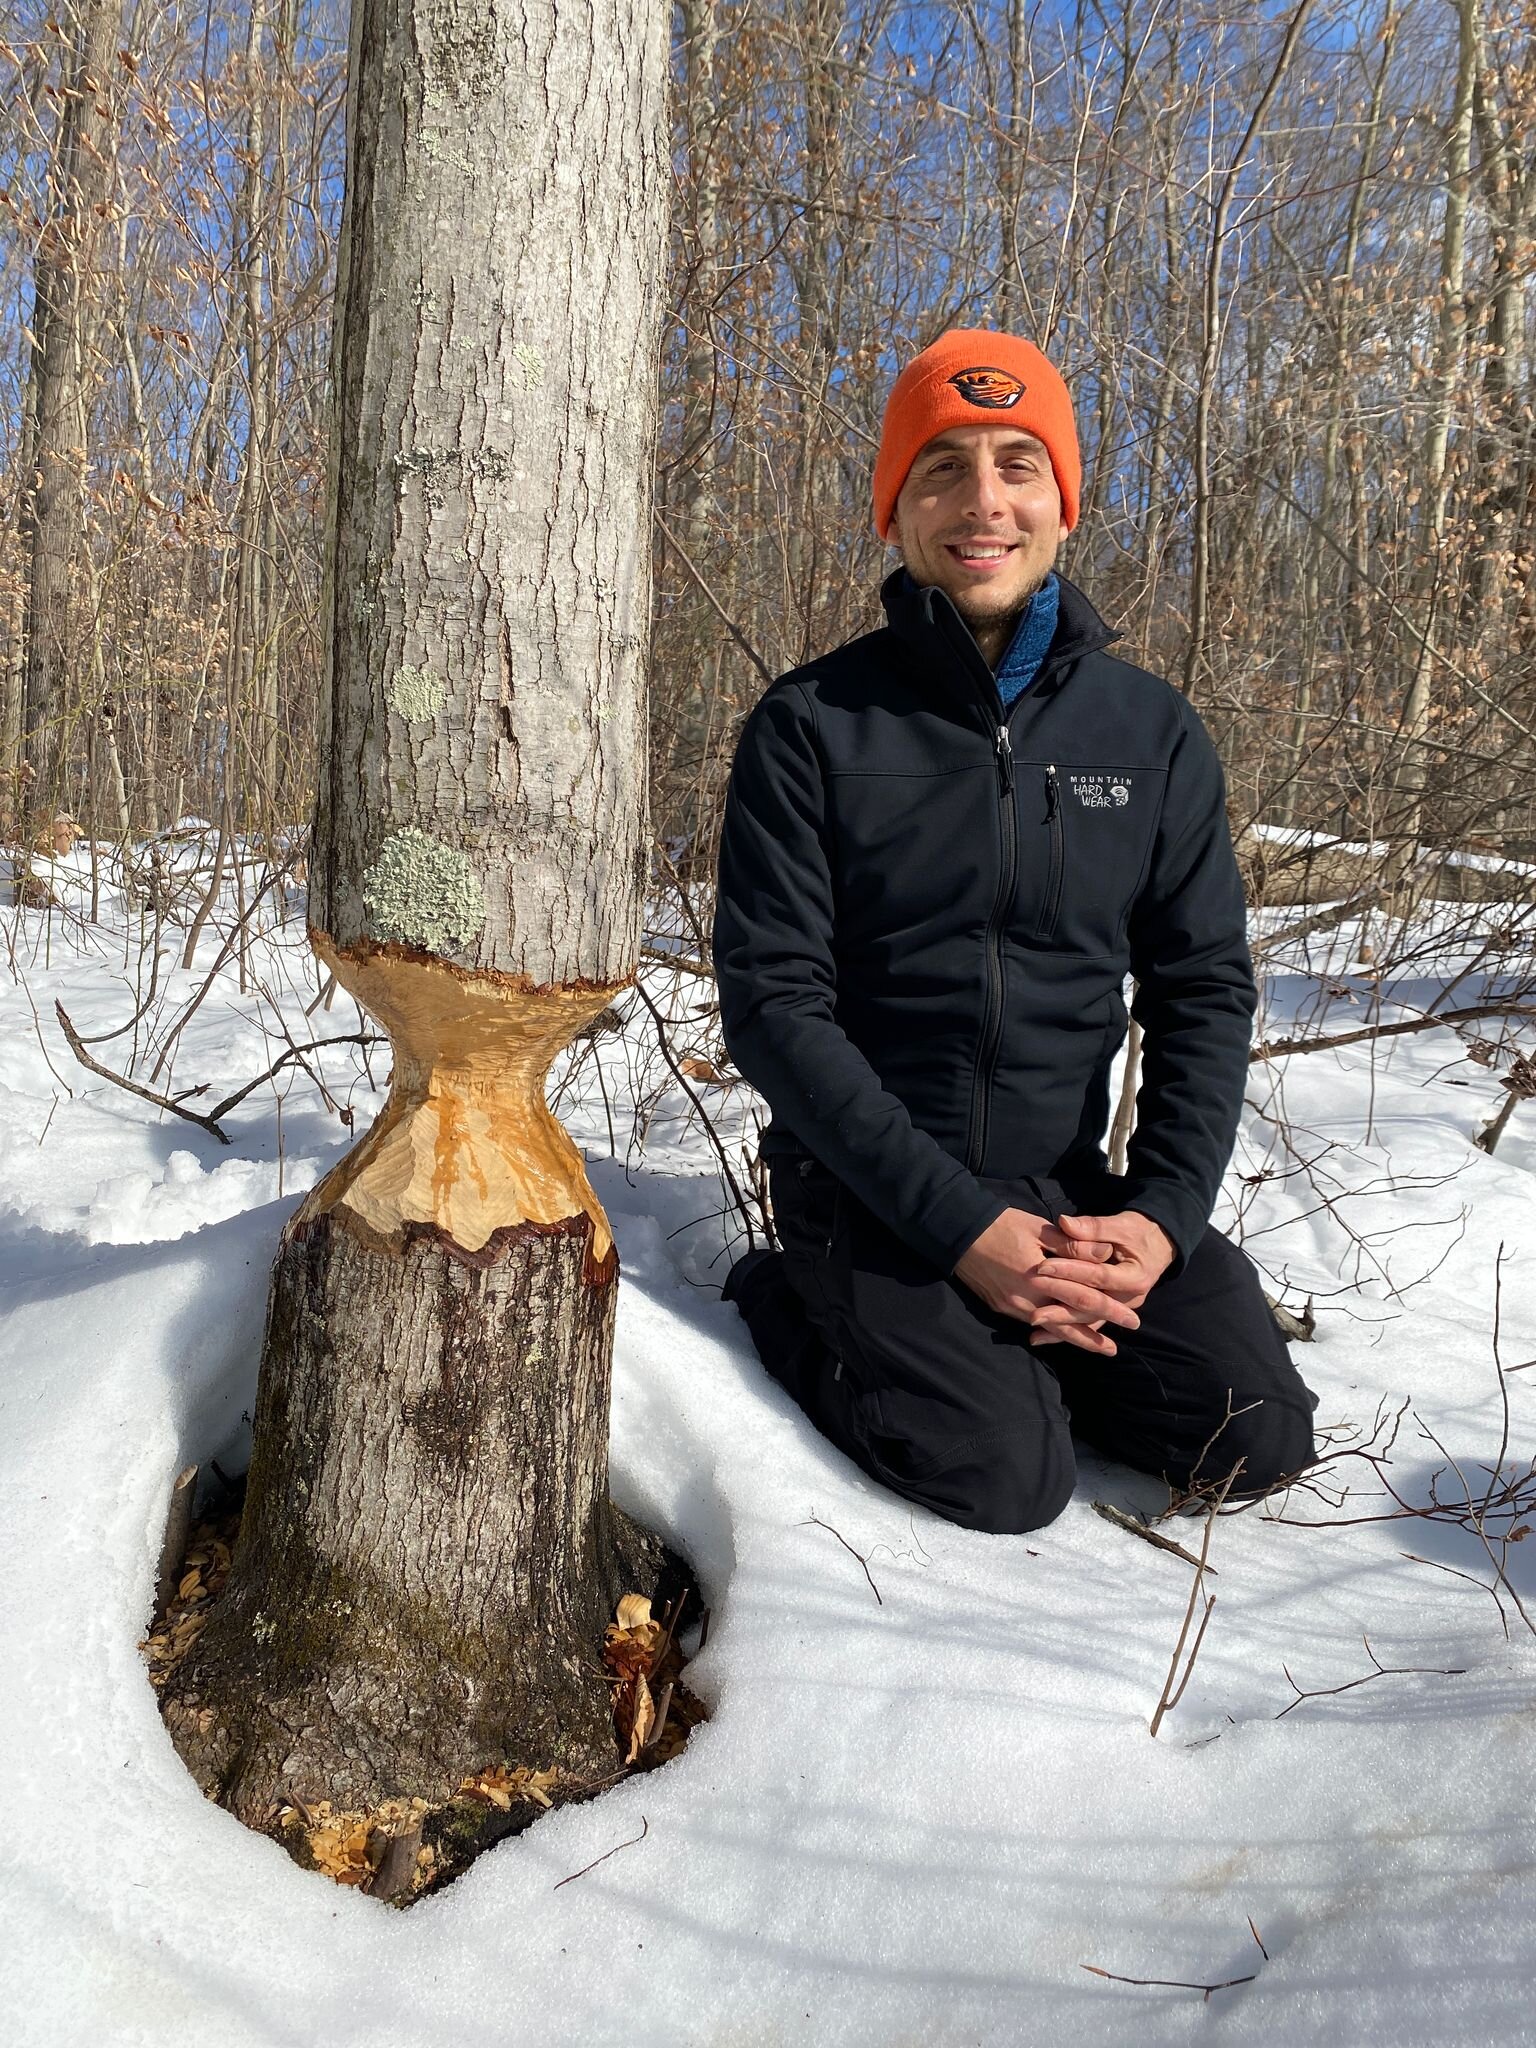 Chris Muller beside a beaver-chewed tree. Muller has been spotting and photographing beavers—including those pictured here—in ponds, creeks and rivers around the city since 2018.